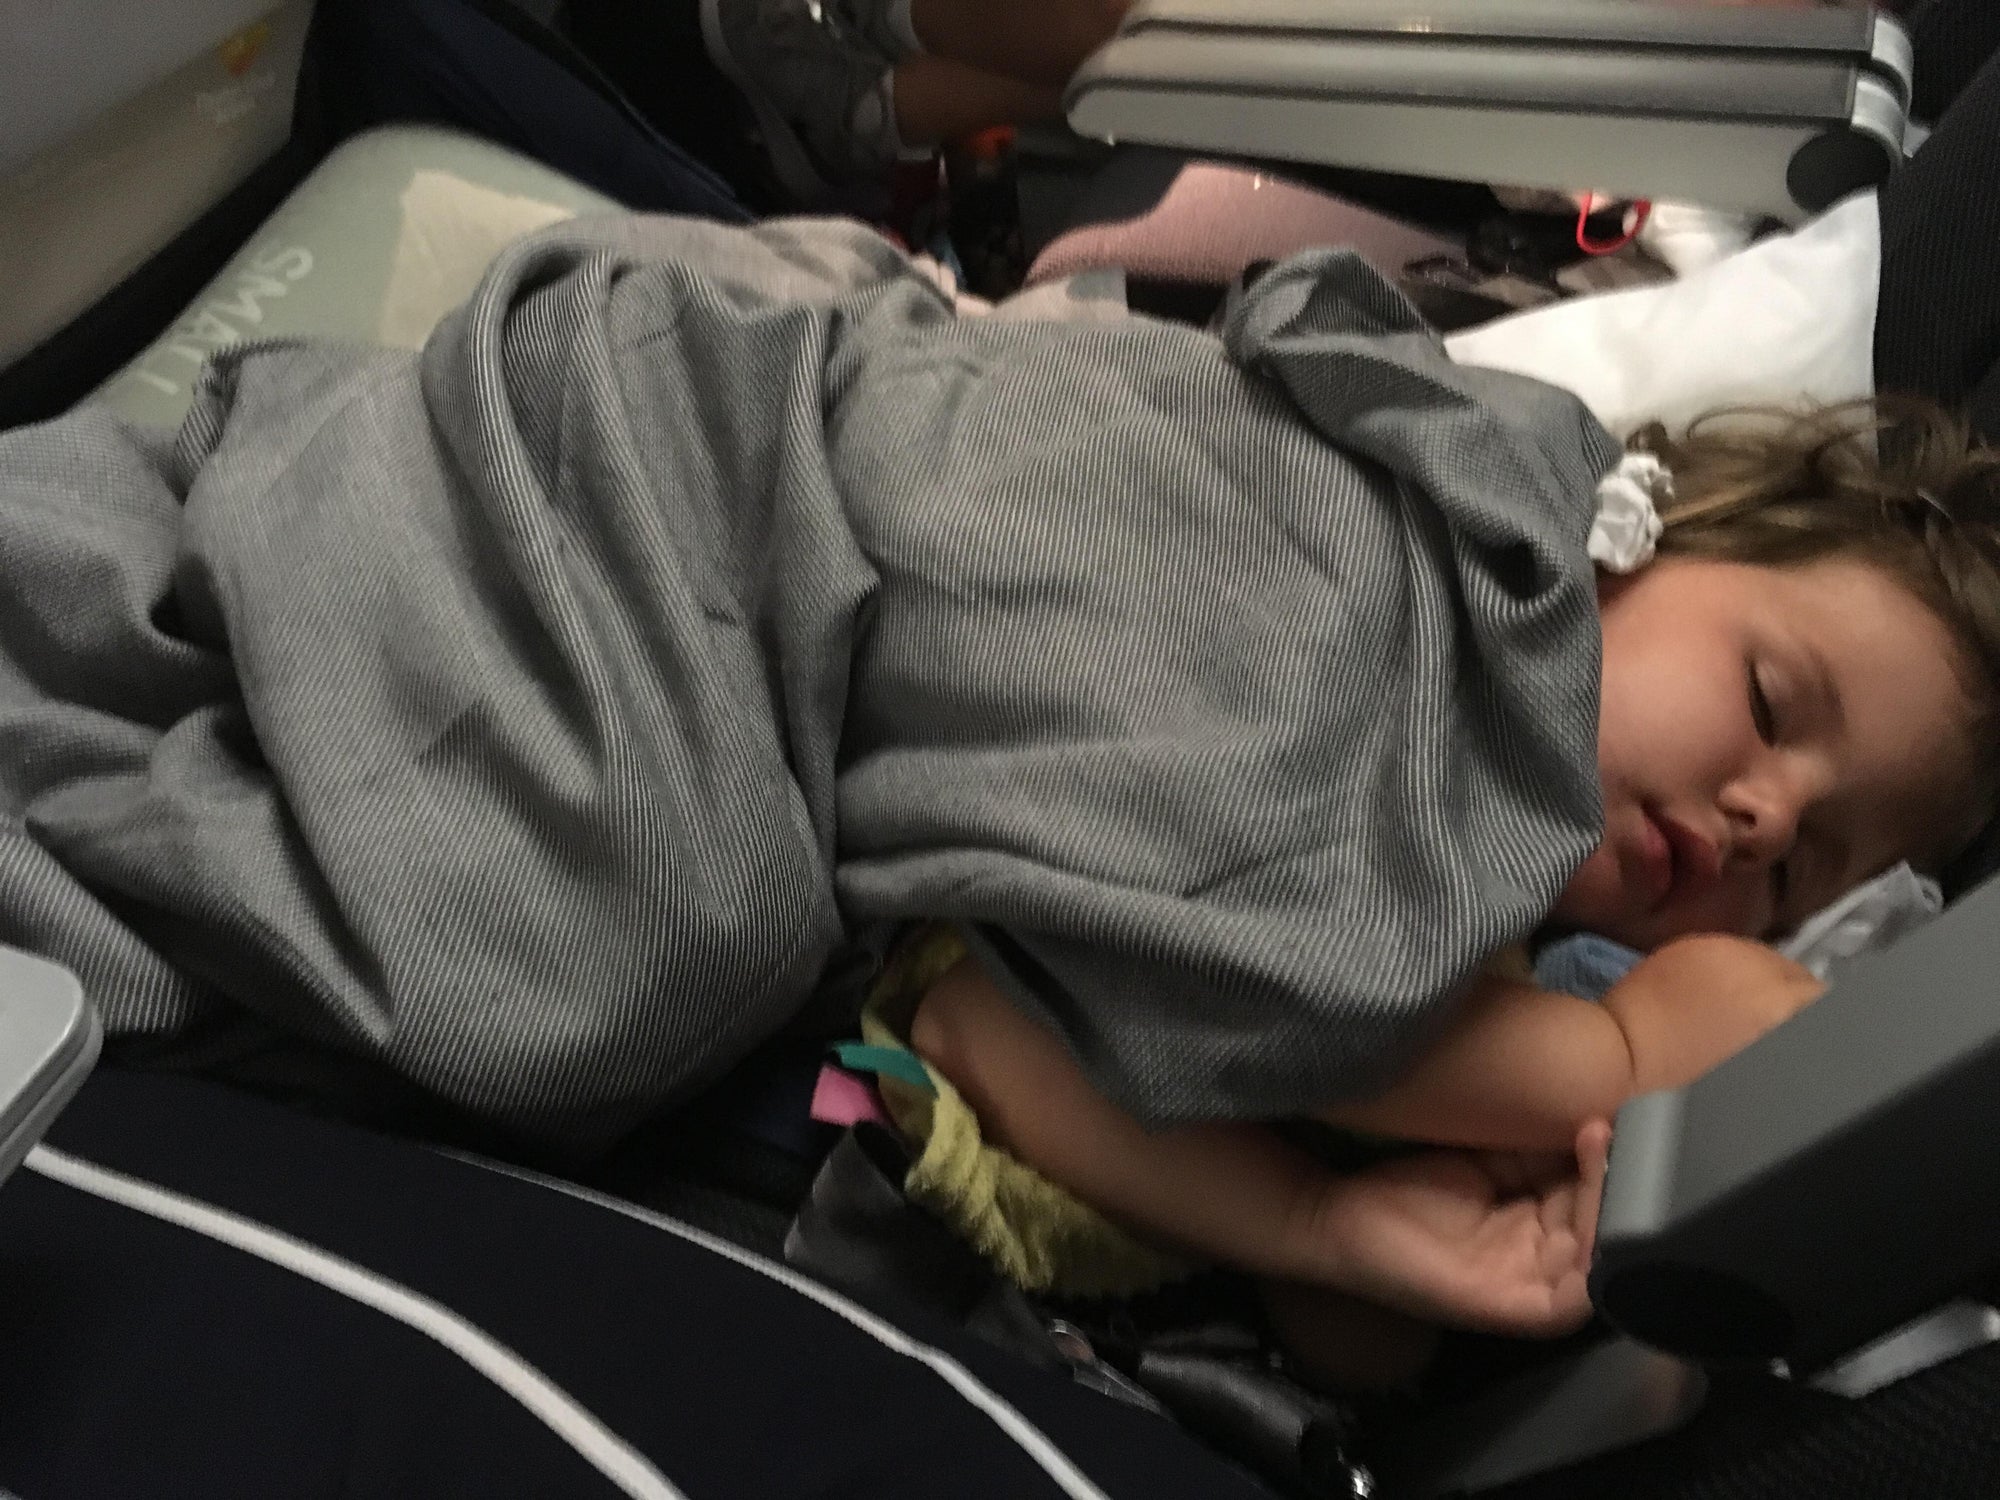 "She slept 10hrs on way home" - Nicola & her 2 year old, Thomas Cook